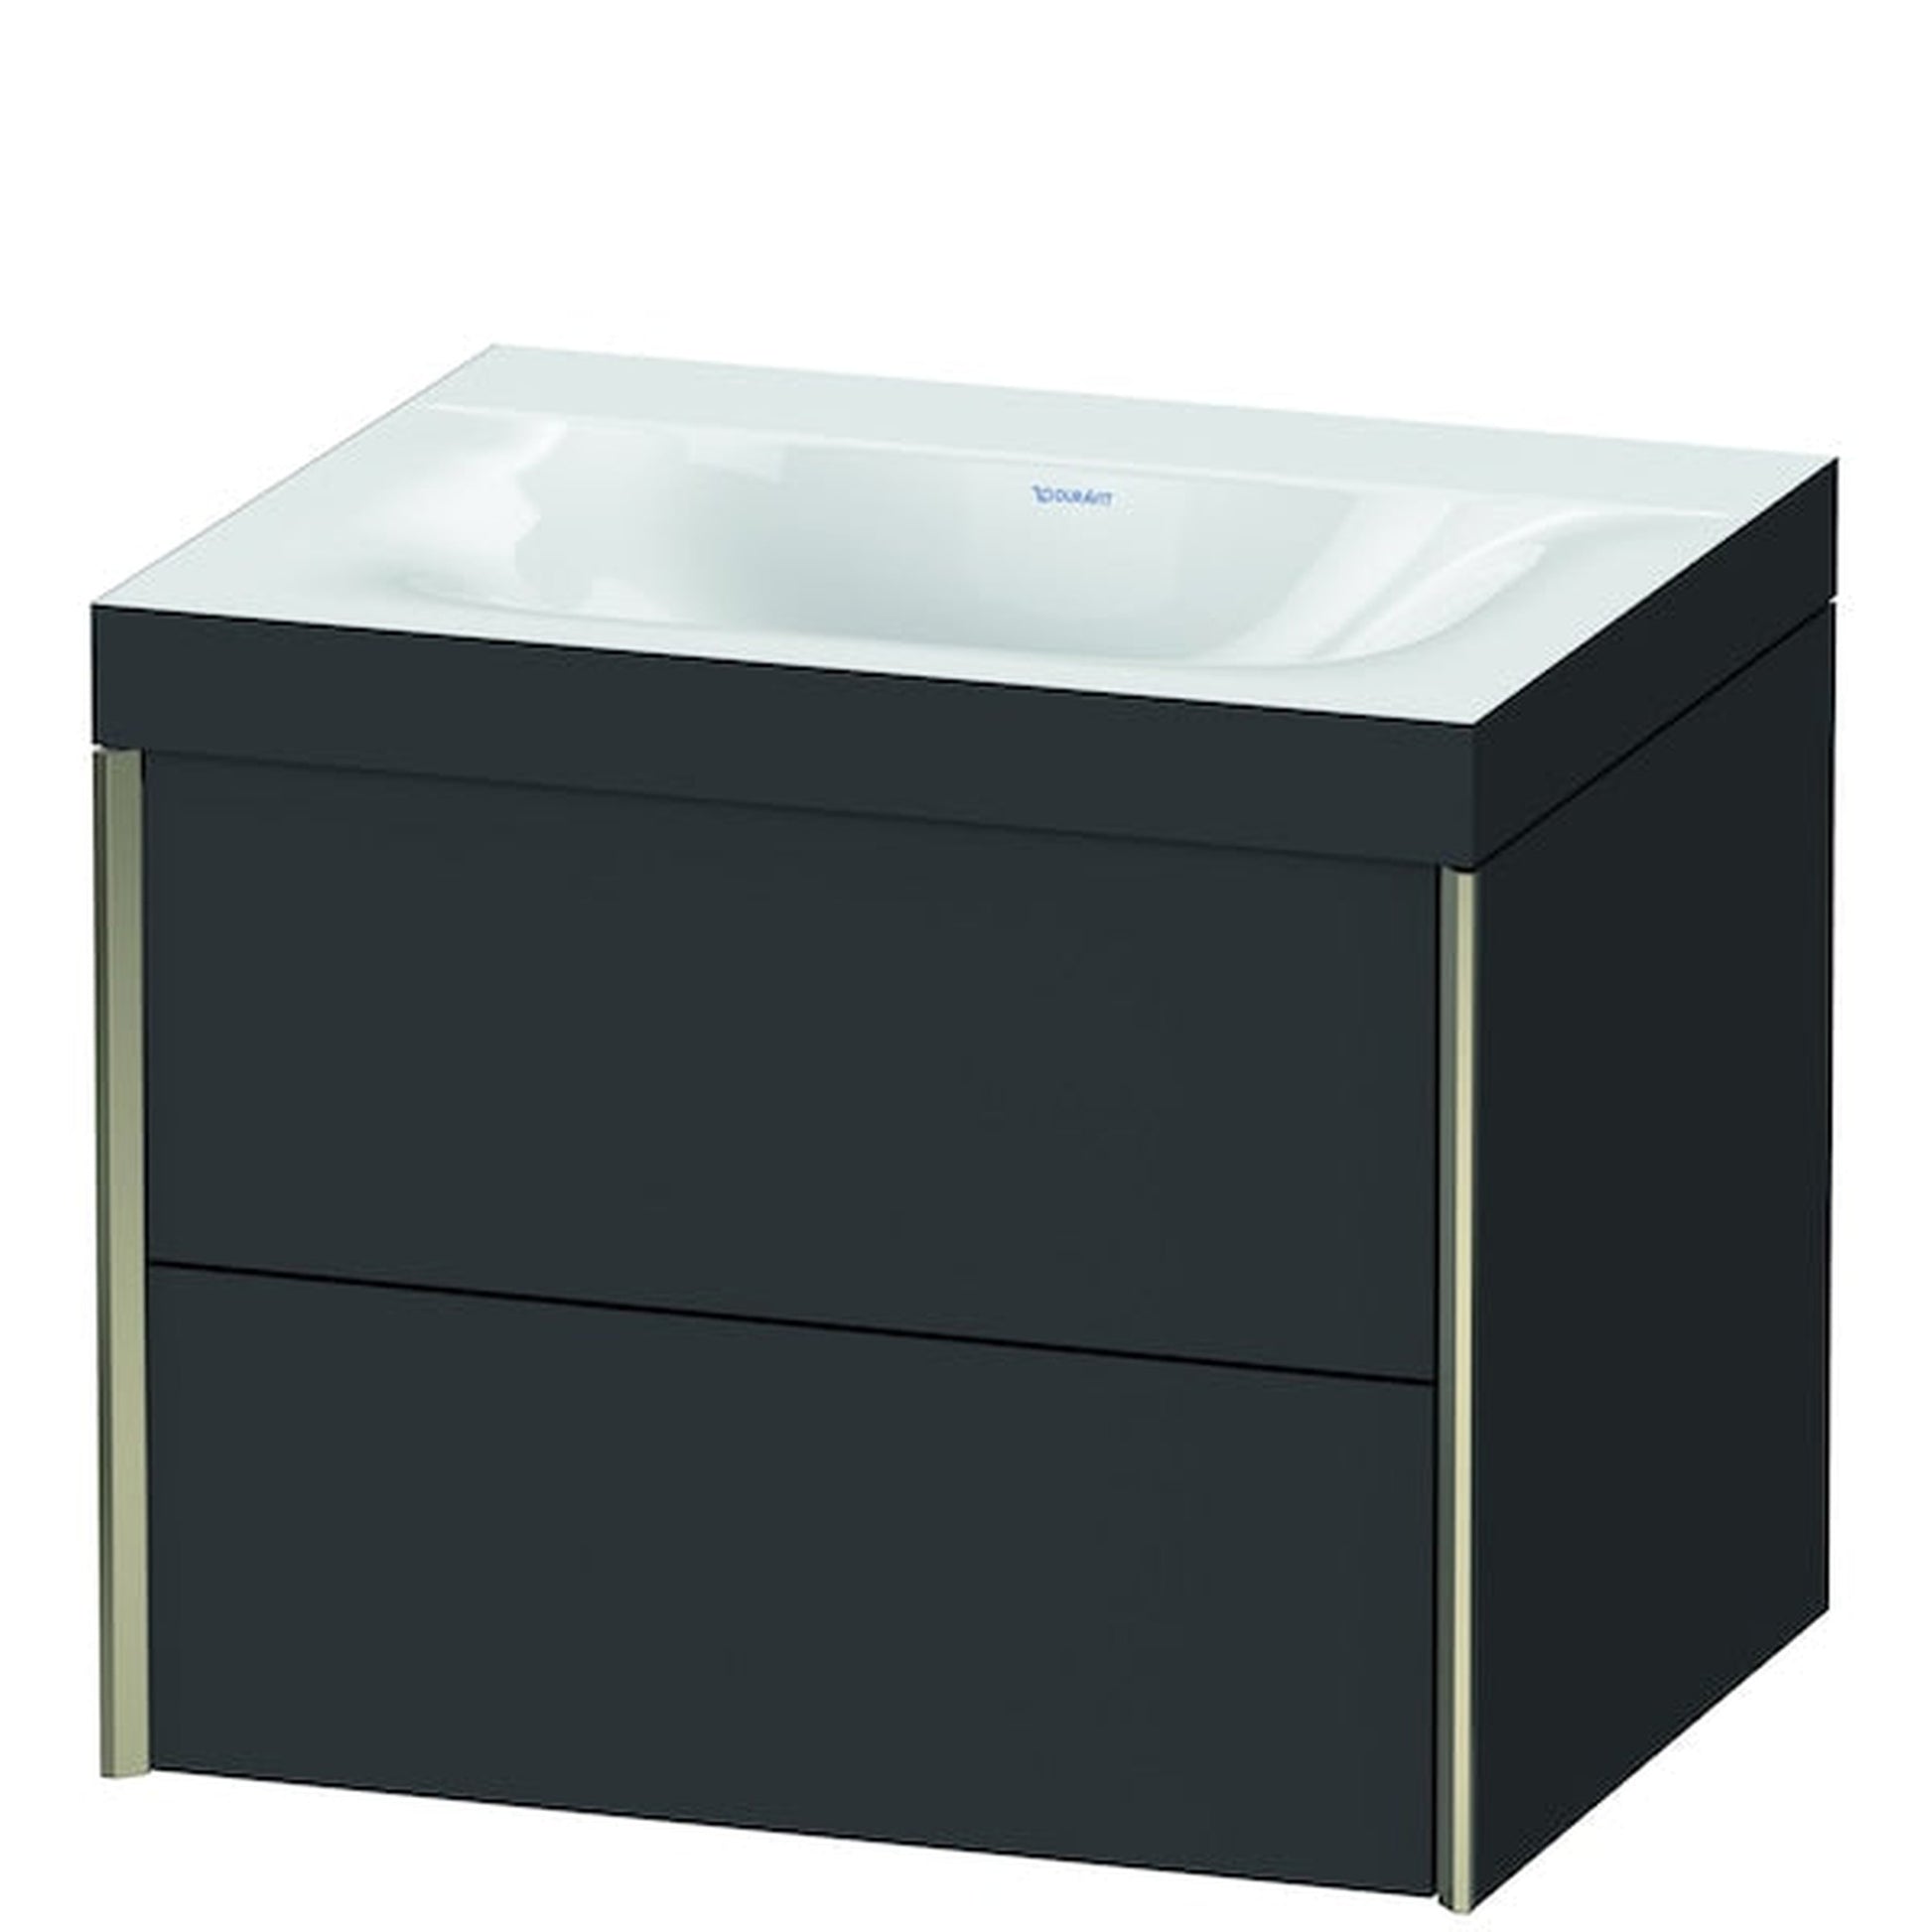 Duravit Xviu 24" x 20" x 19" Two Drawer C-Bonded Wall-Mount Vanity Kit Without Tap Hole, Graphite (XV4614NB180C)